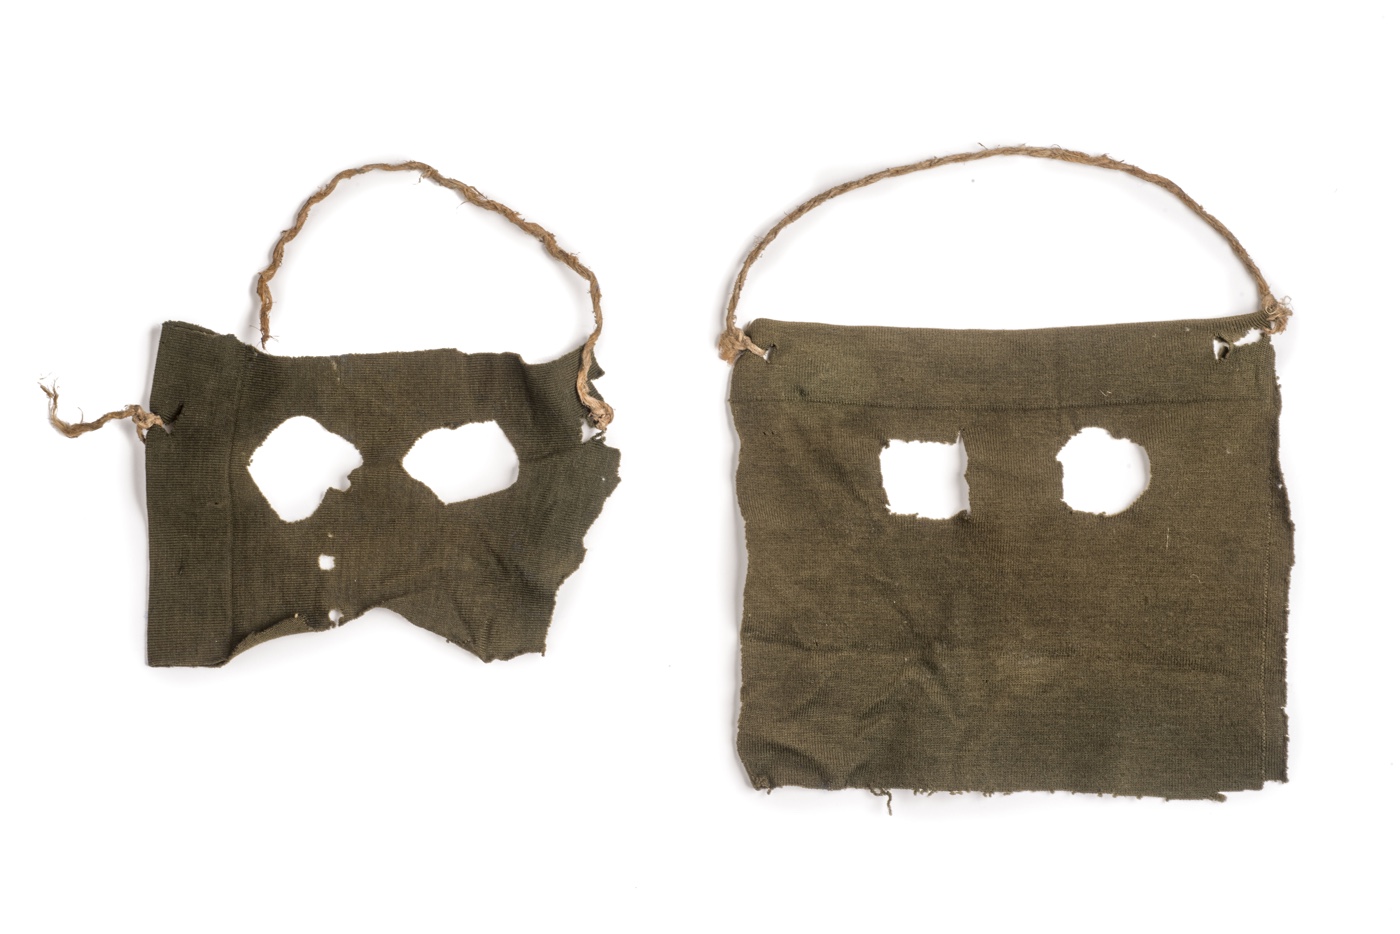 Masks used by the Stratton Brothers - the first criminals to be convicted in Great Britain for murder based on fingerprint evidence, 1905 © Museum of London